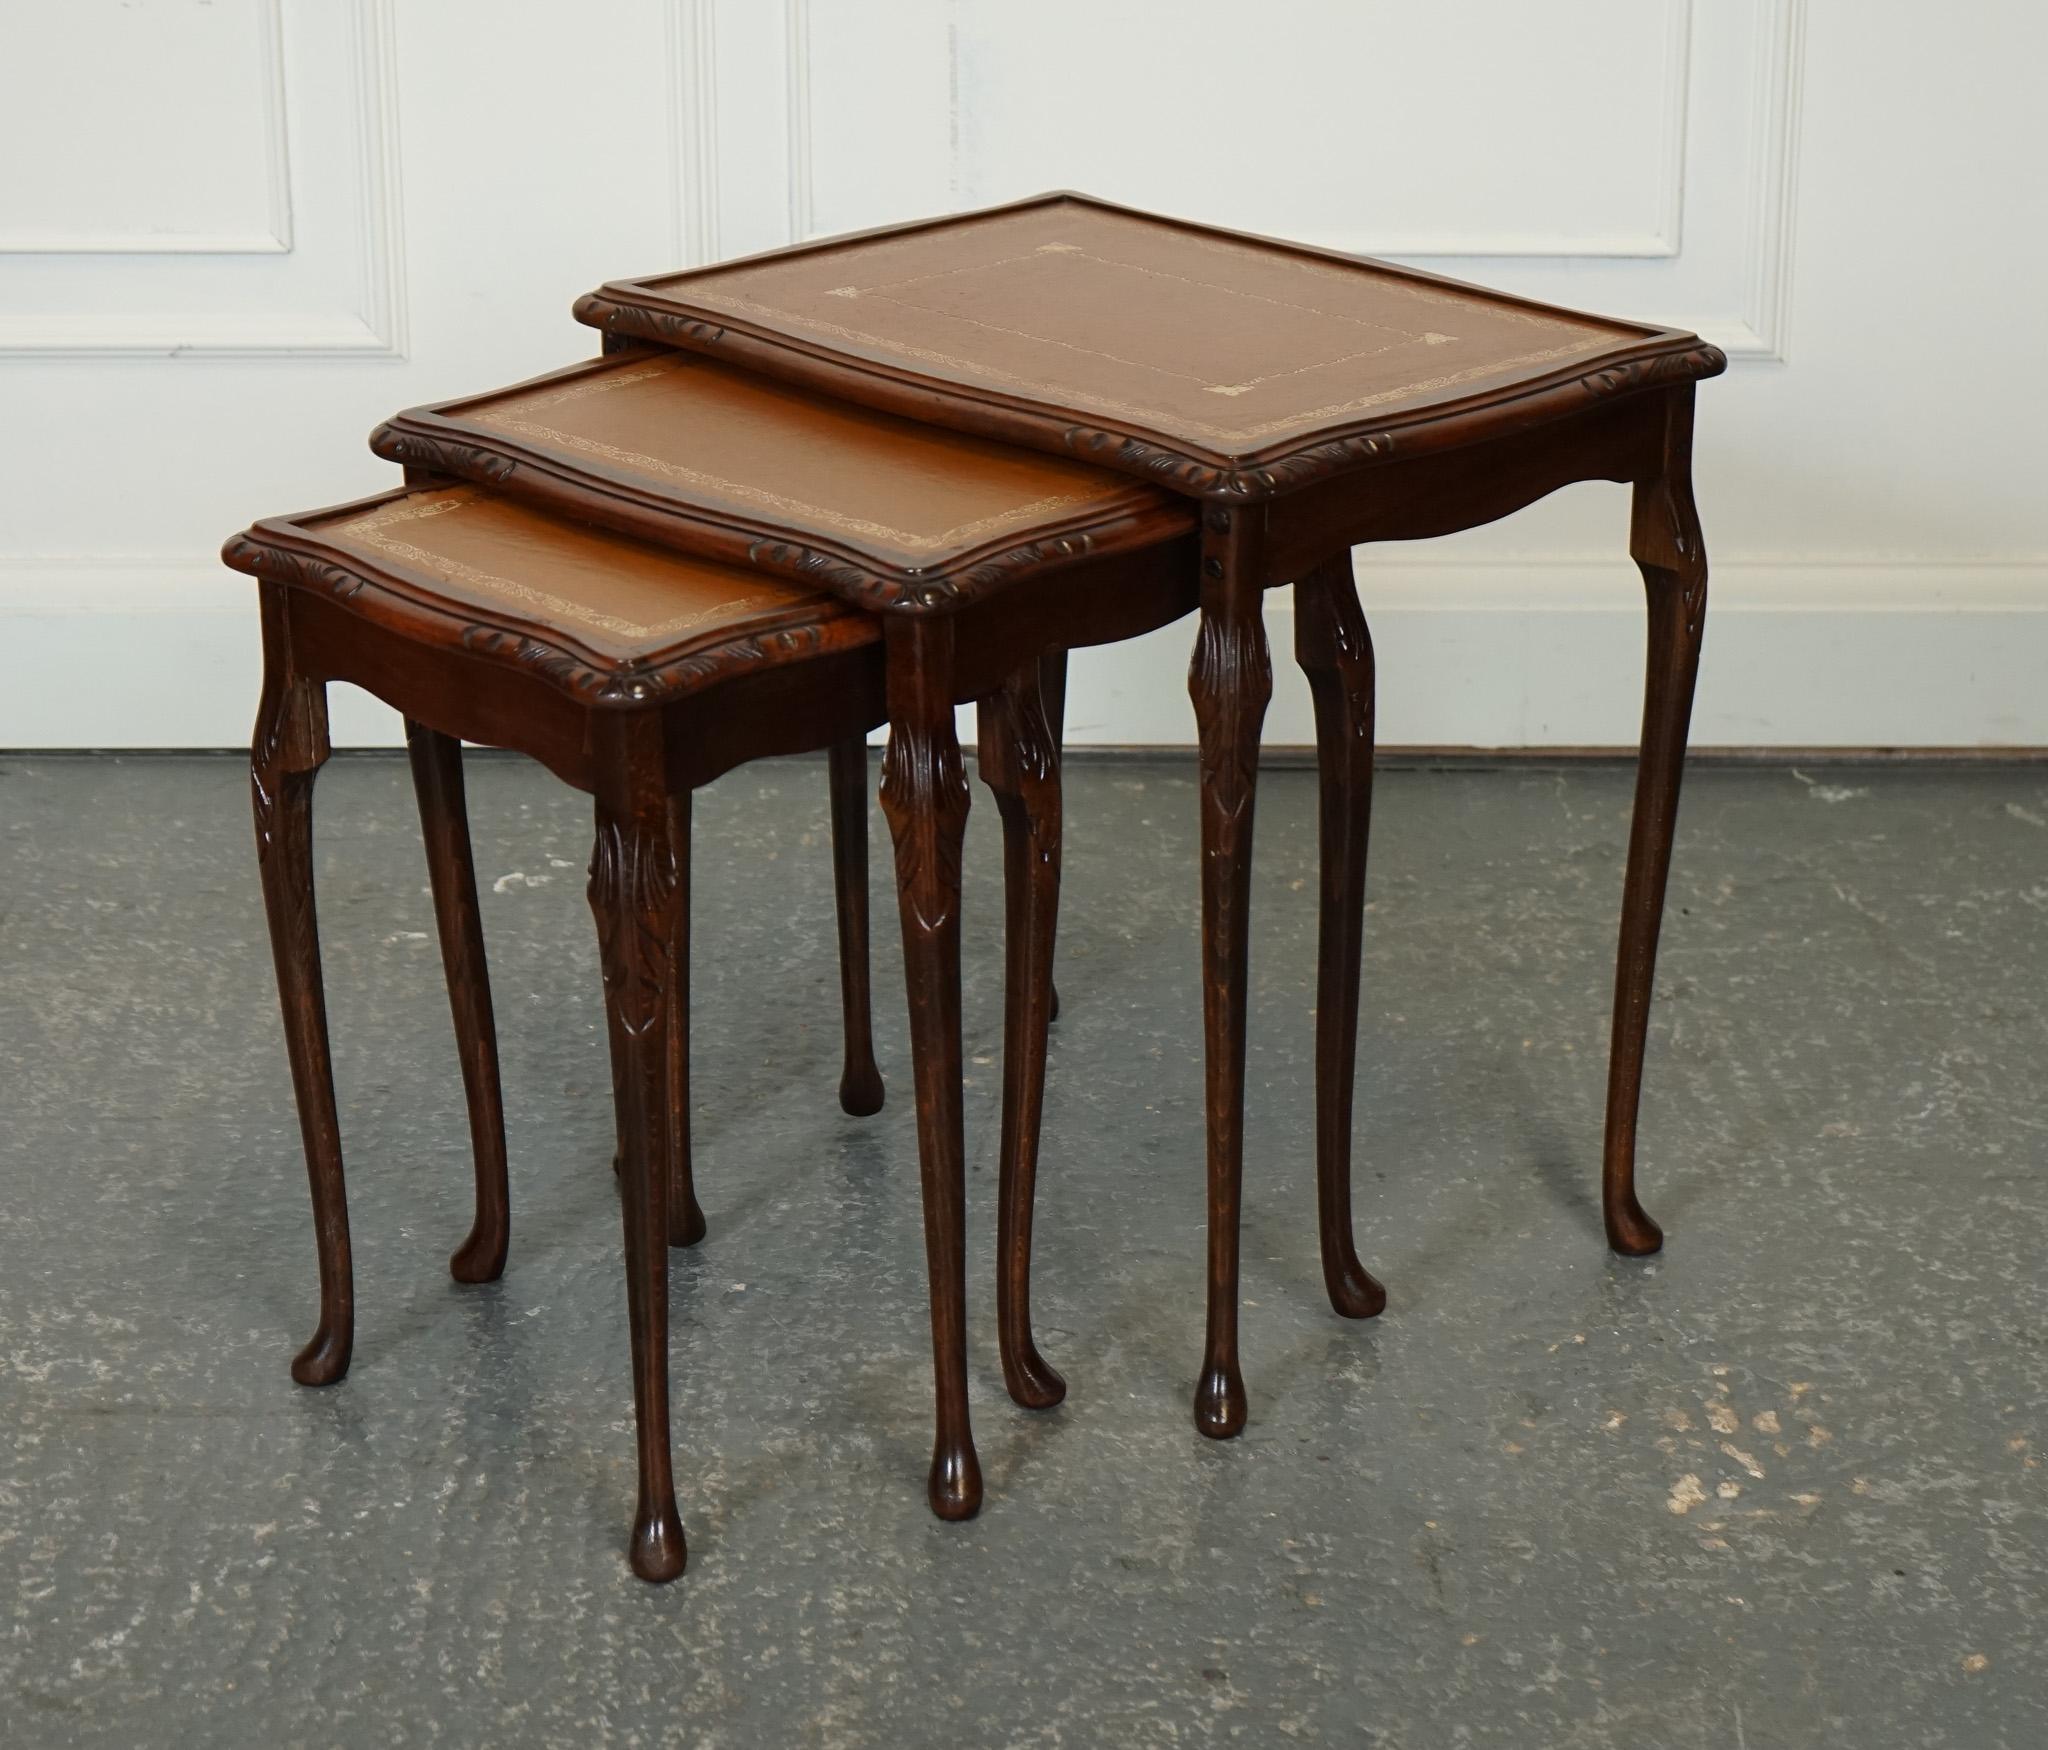 Antiques of London



We are delighted to offer for sale this Lovely Set of Nesting Table With Brown Leather Tops.

A vintage nest of tables with Queen Anne-style legs and a brown embossed leather top is a charming and stylish addition to any home.